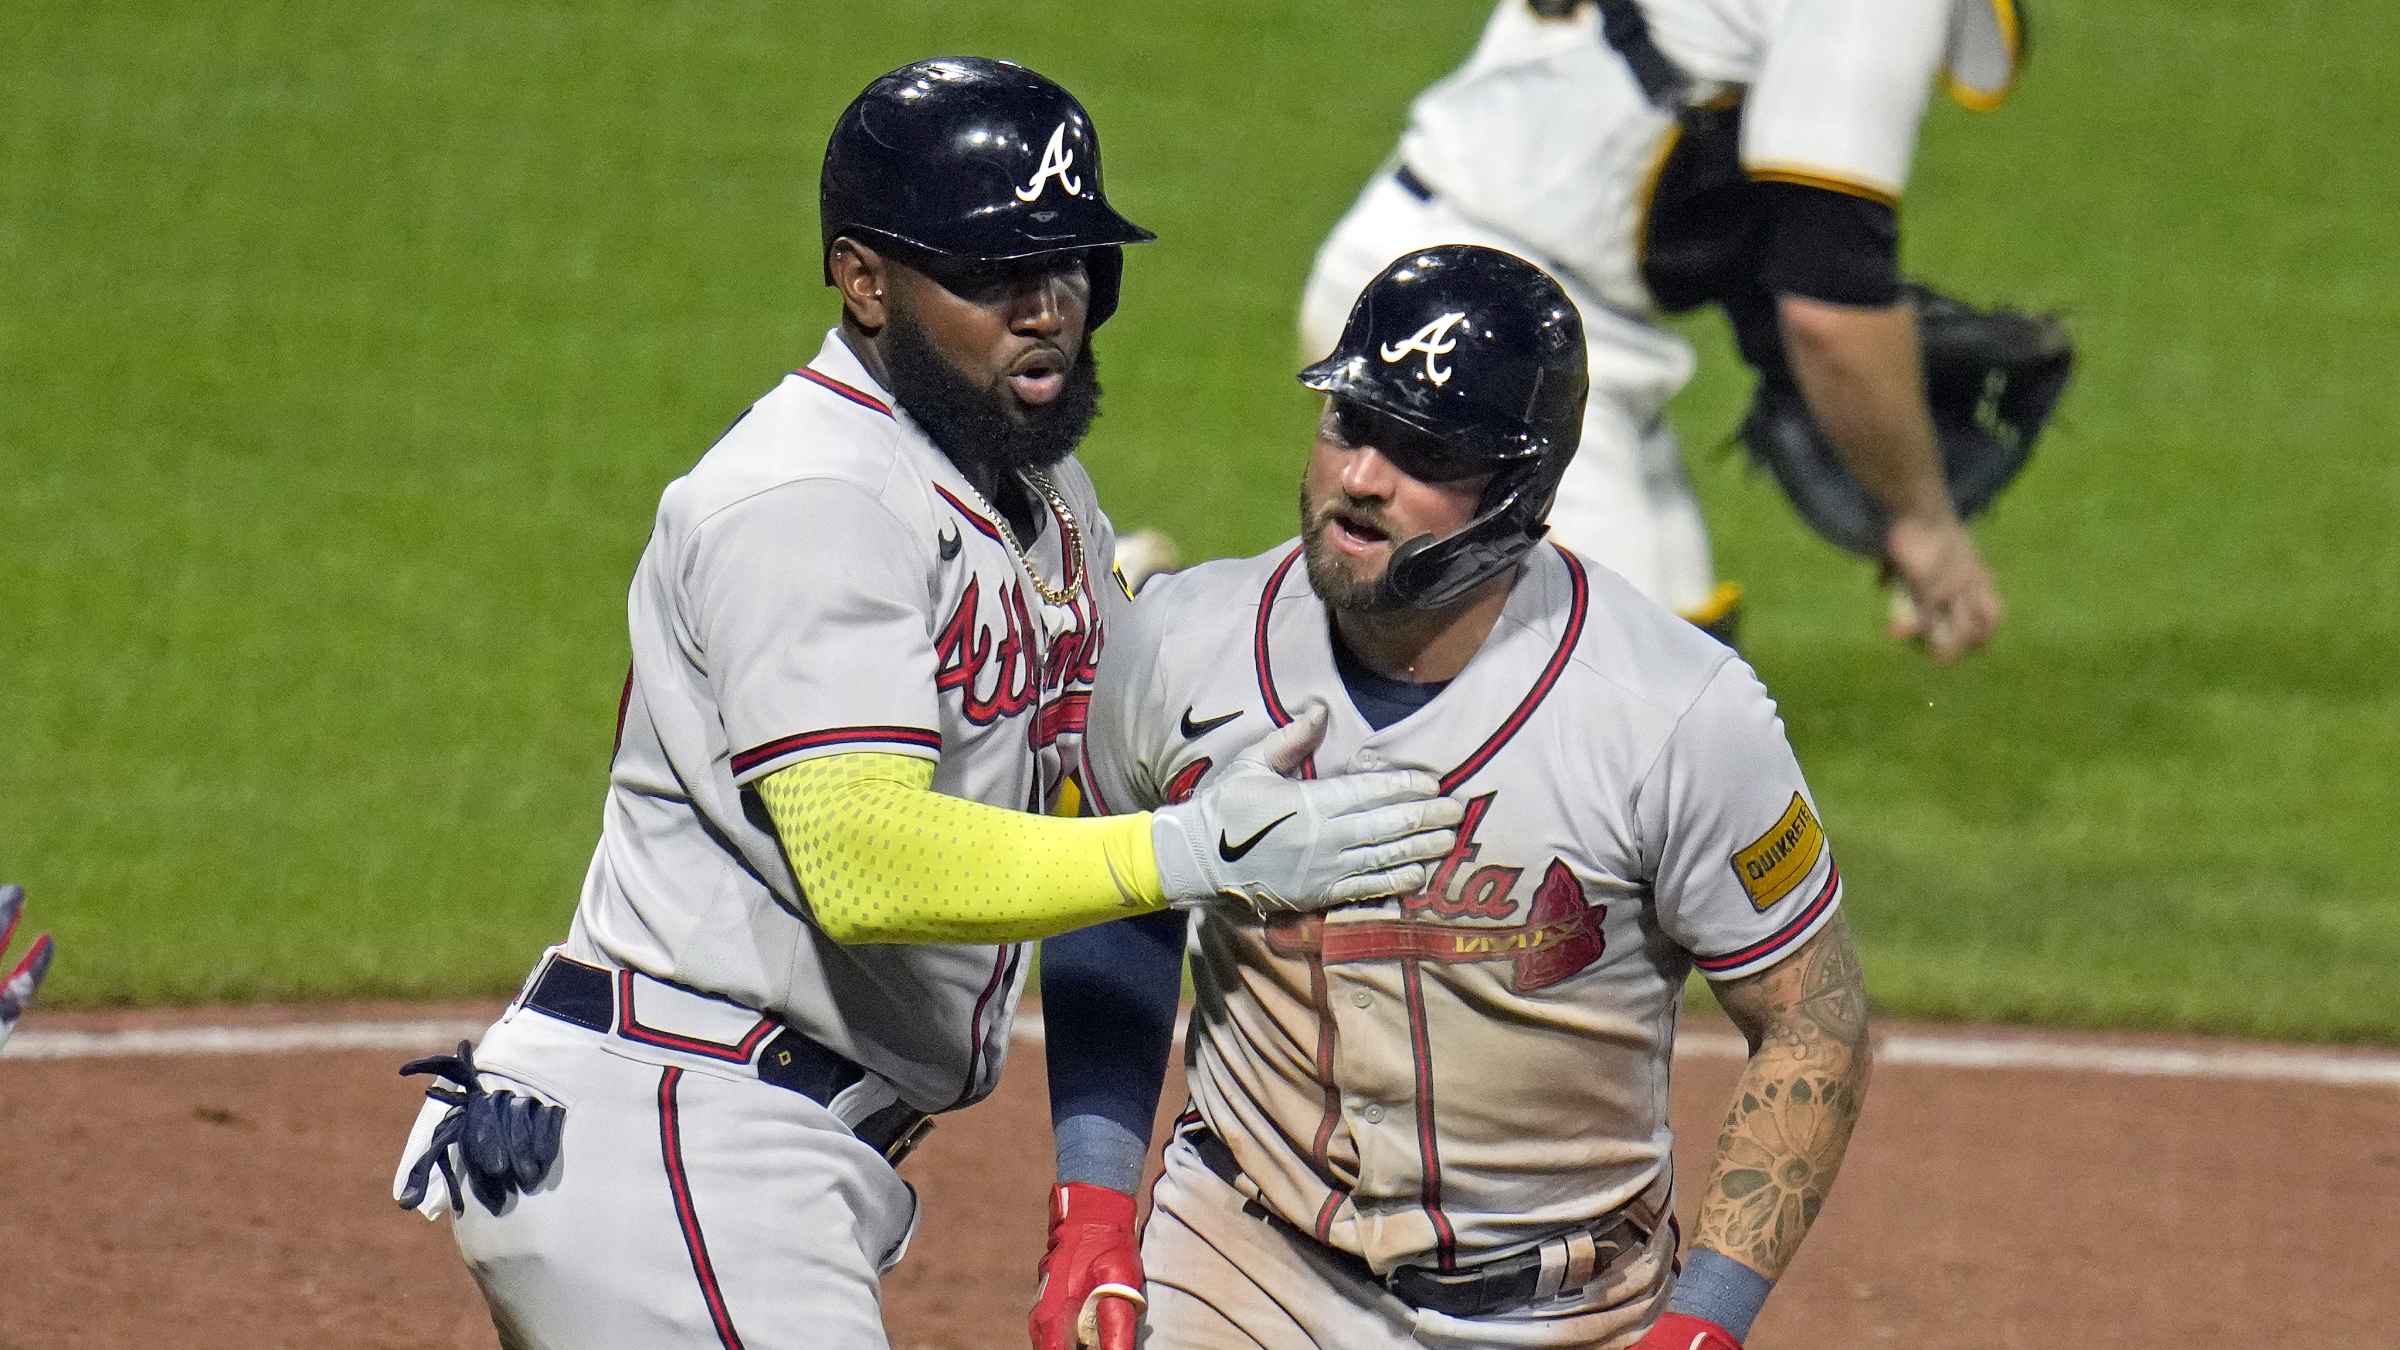 Ronald Acuna Jr. injury update: Braves OF exits game after being hit by  pitch - DraftKings Network